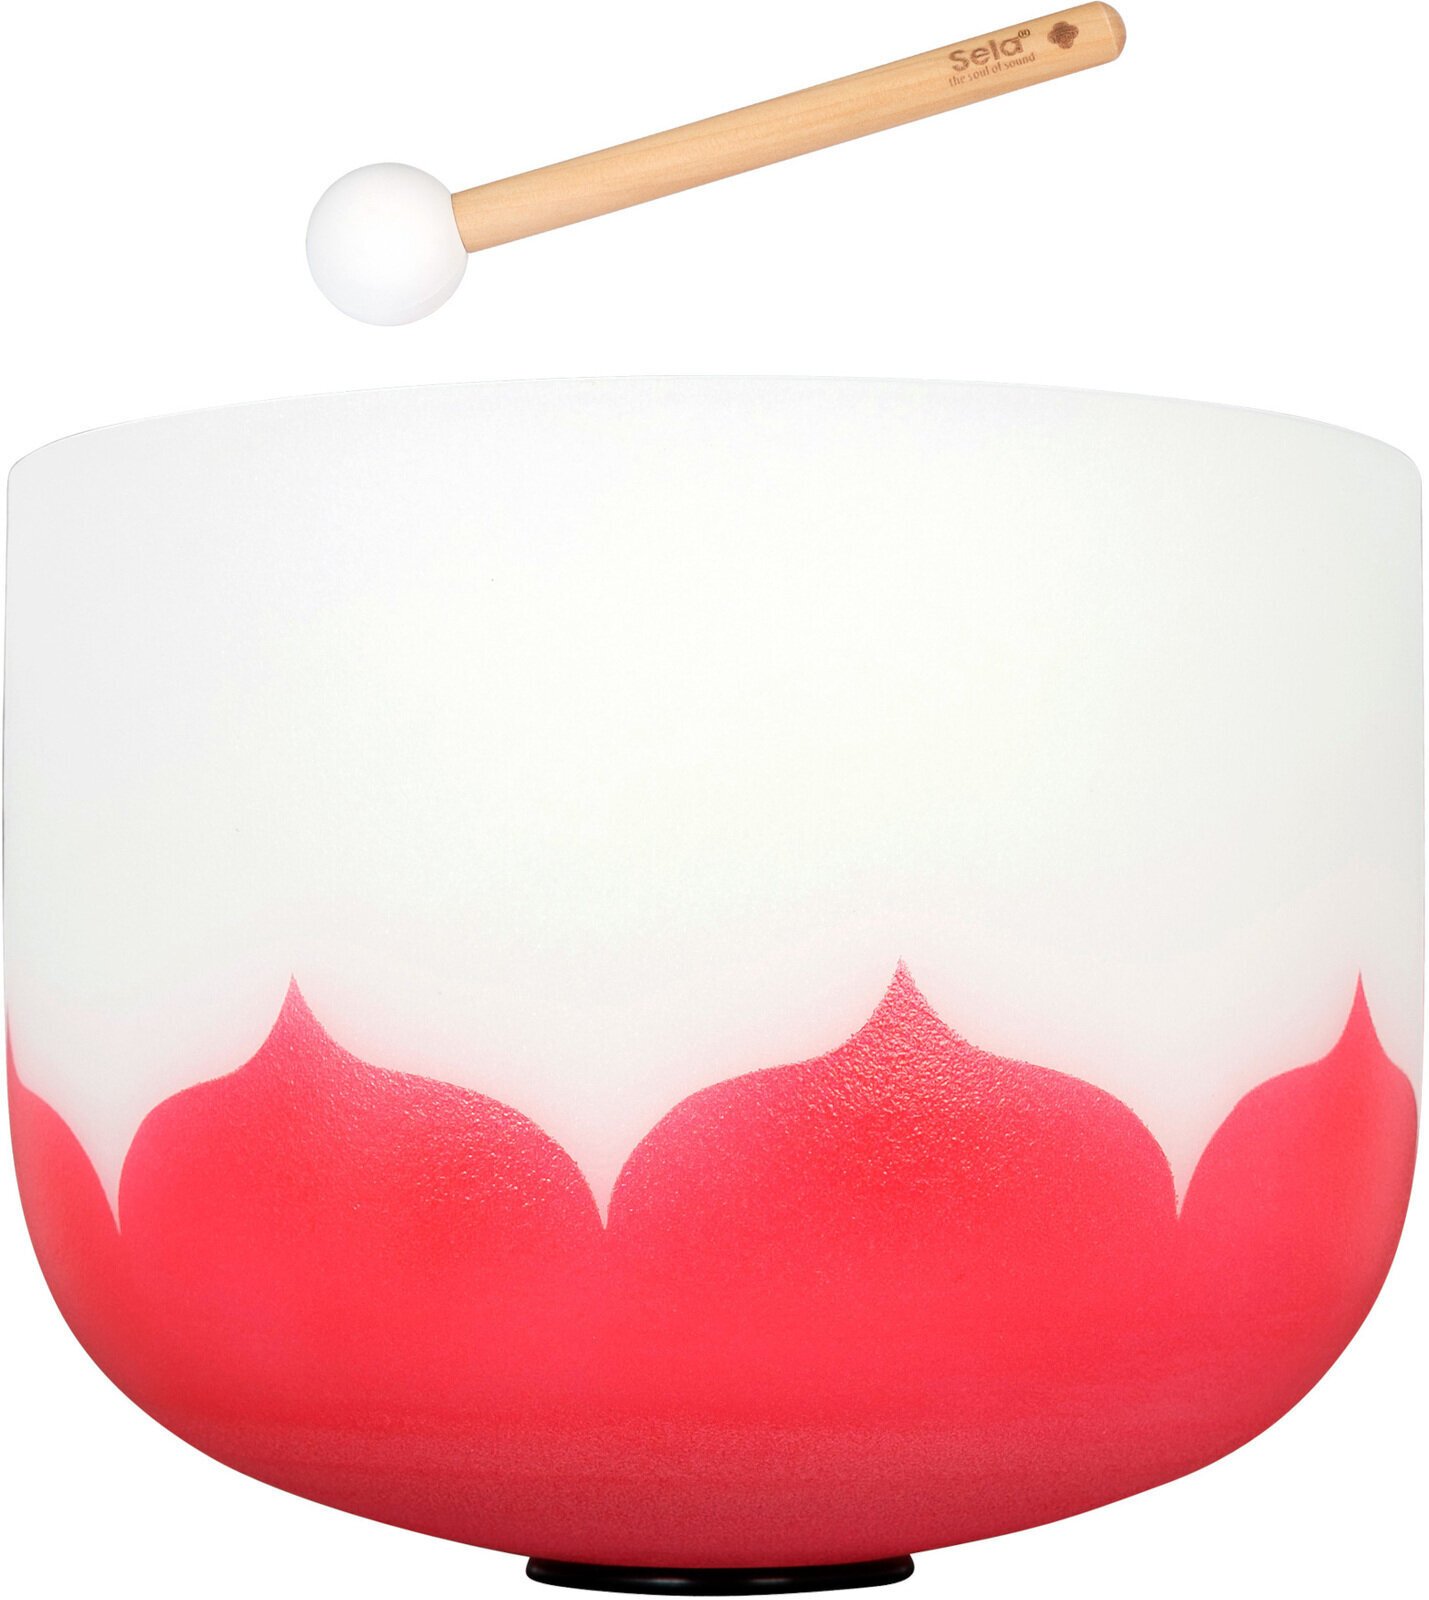 Percussion for music therapy Sela 14“ Crystal Singing Bowl Set Lotus 432Hz C - Red (Root Chakra)